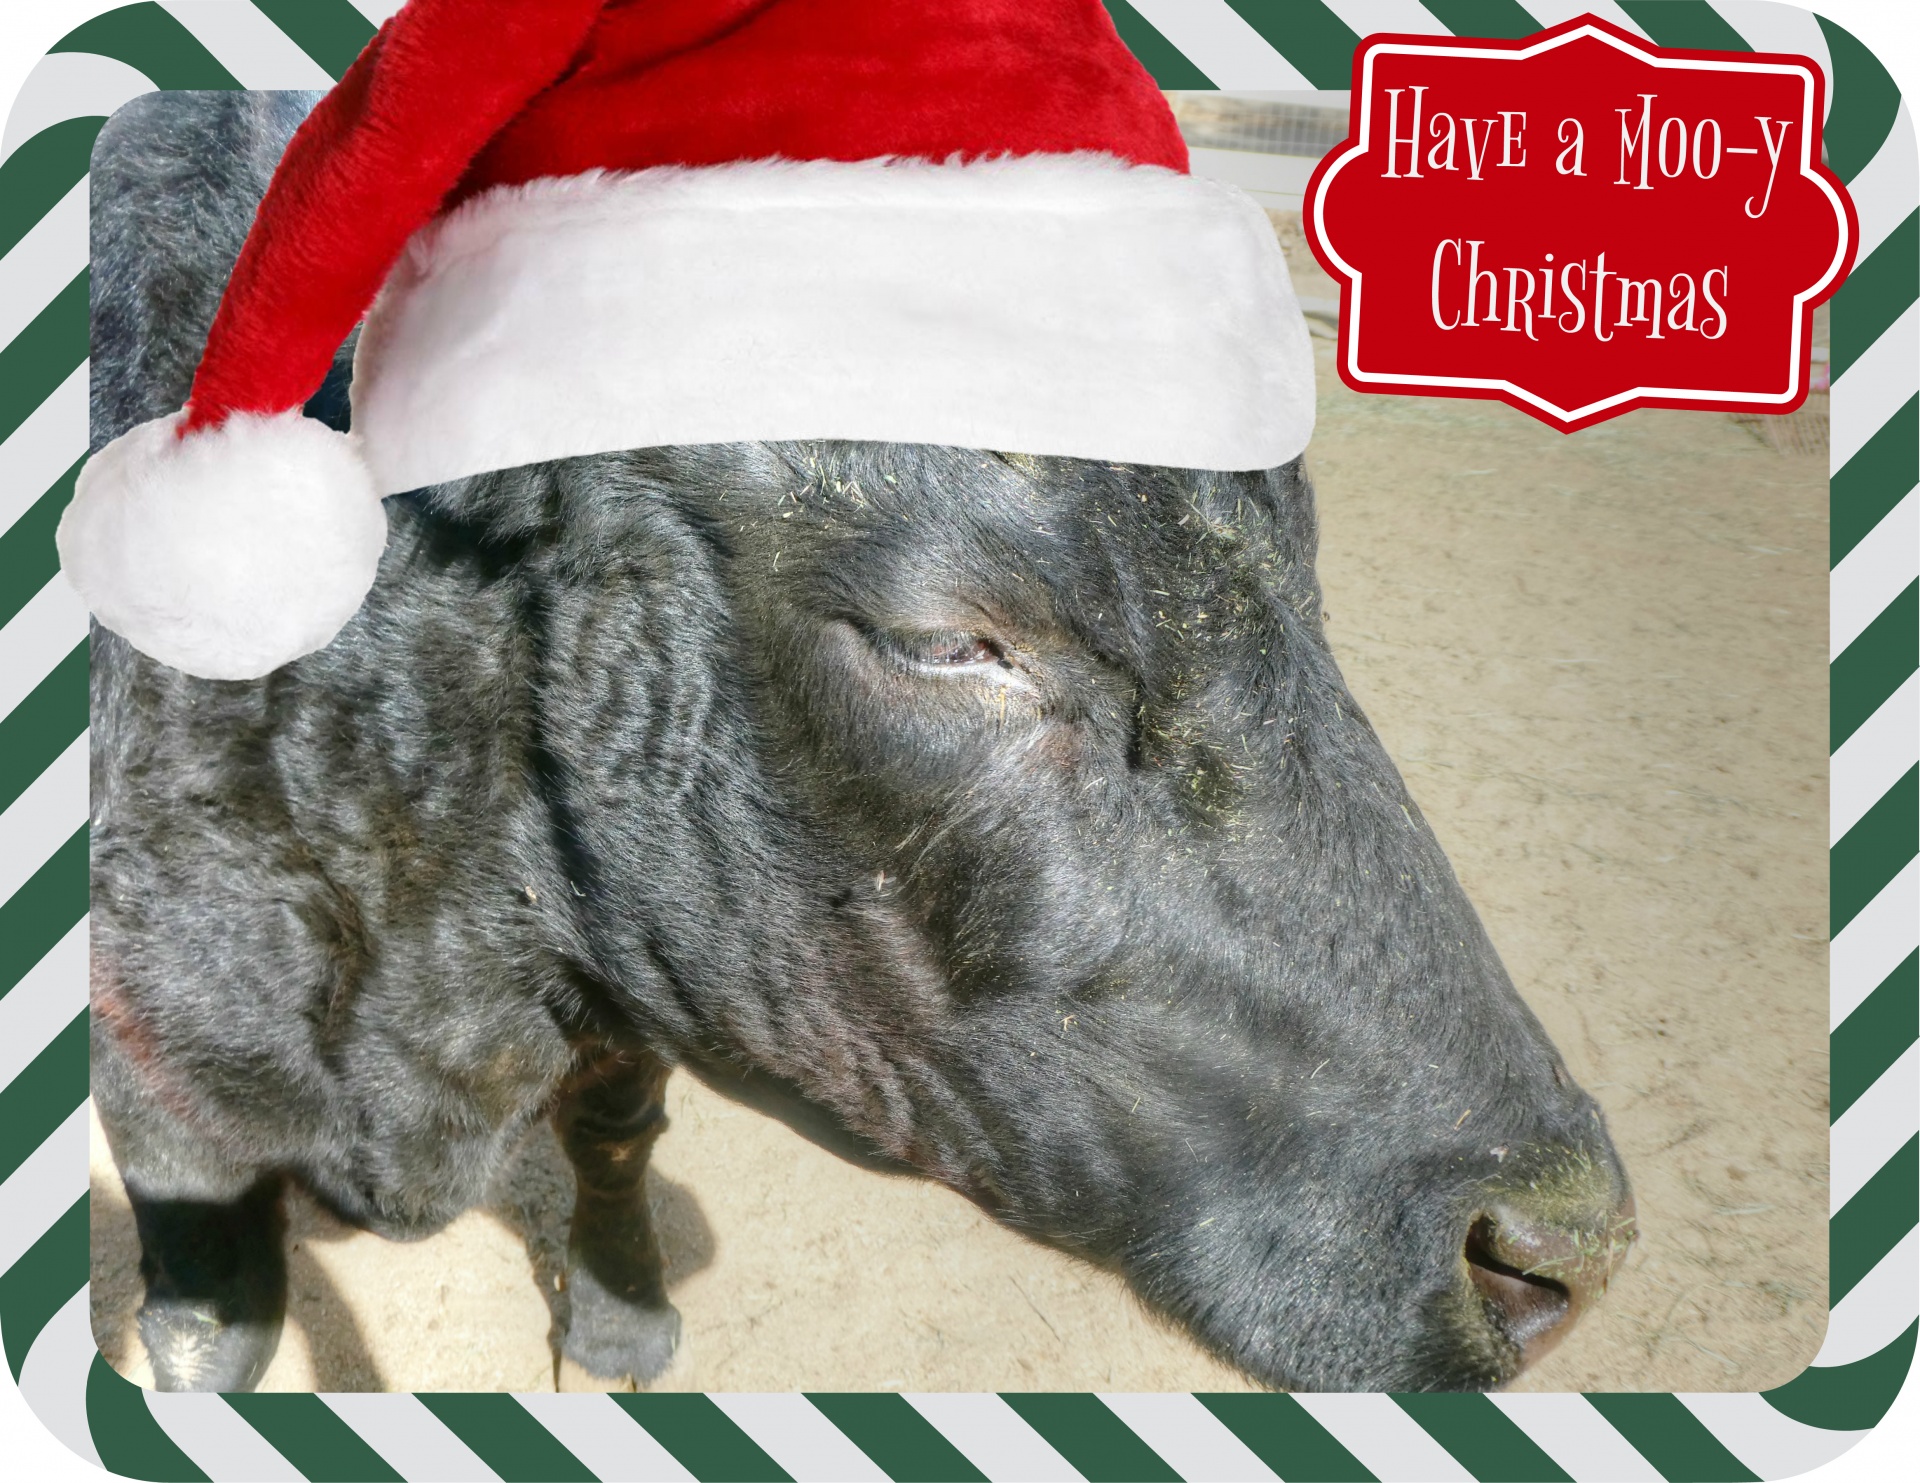 face of a black cow with Santa cap and greeting